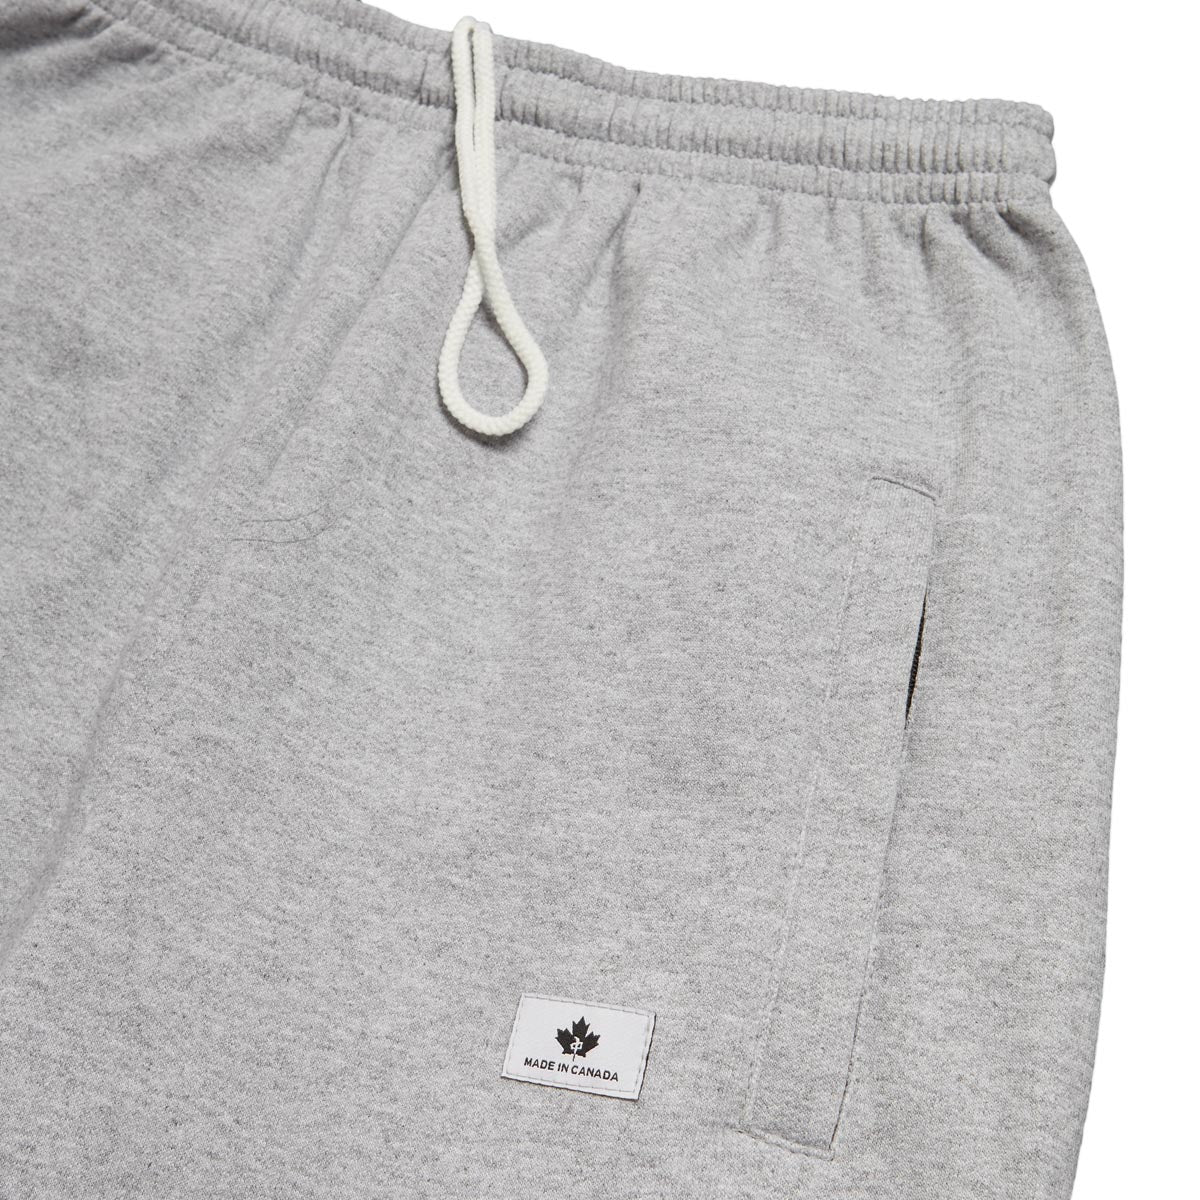 RDS x Kris Markovich Faces Sweat Pants - Athletic Heather image 3